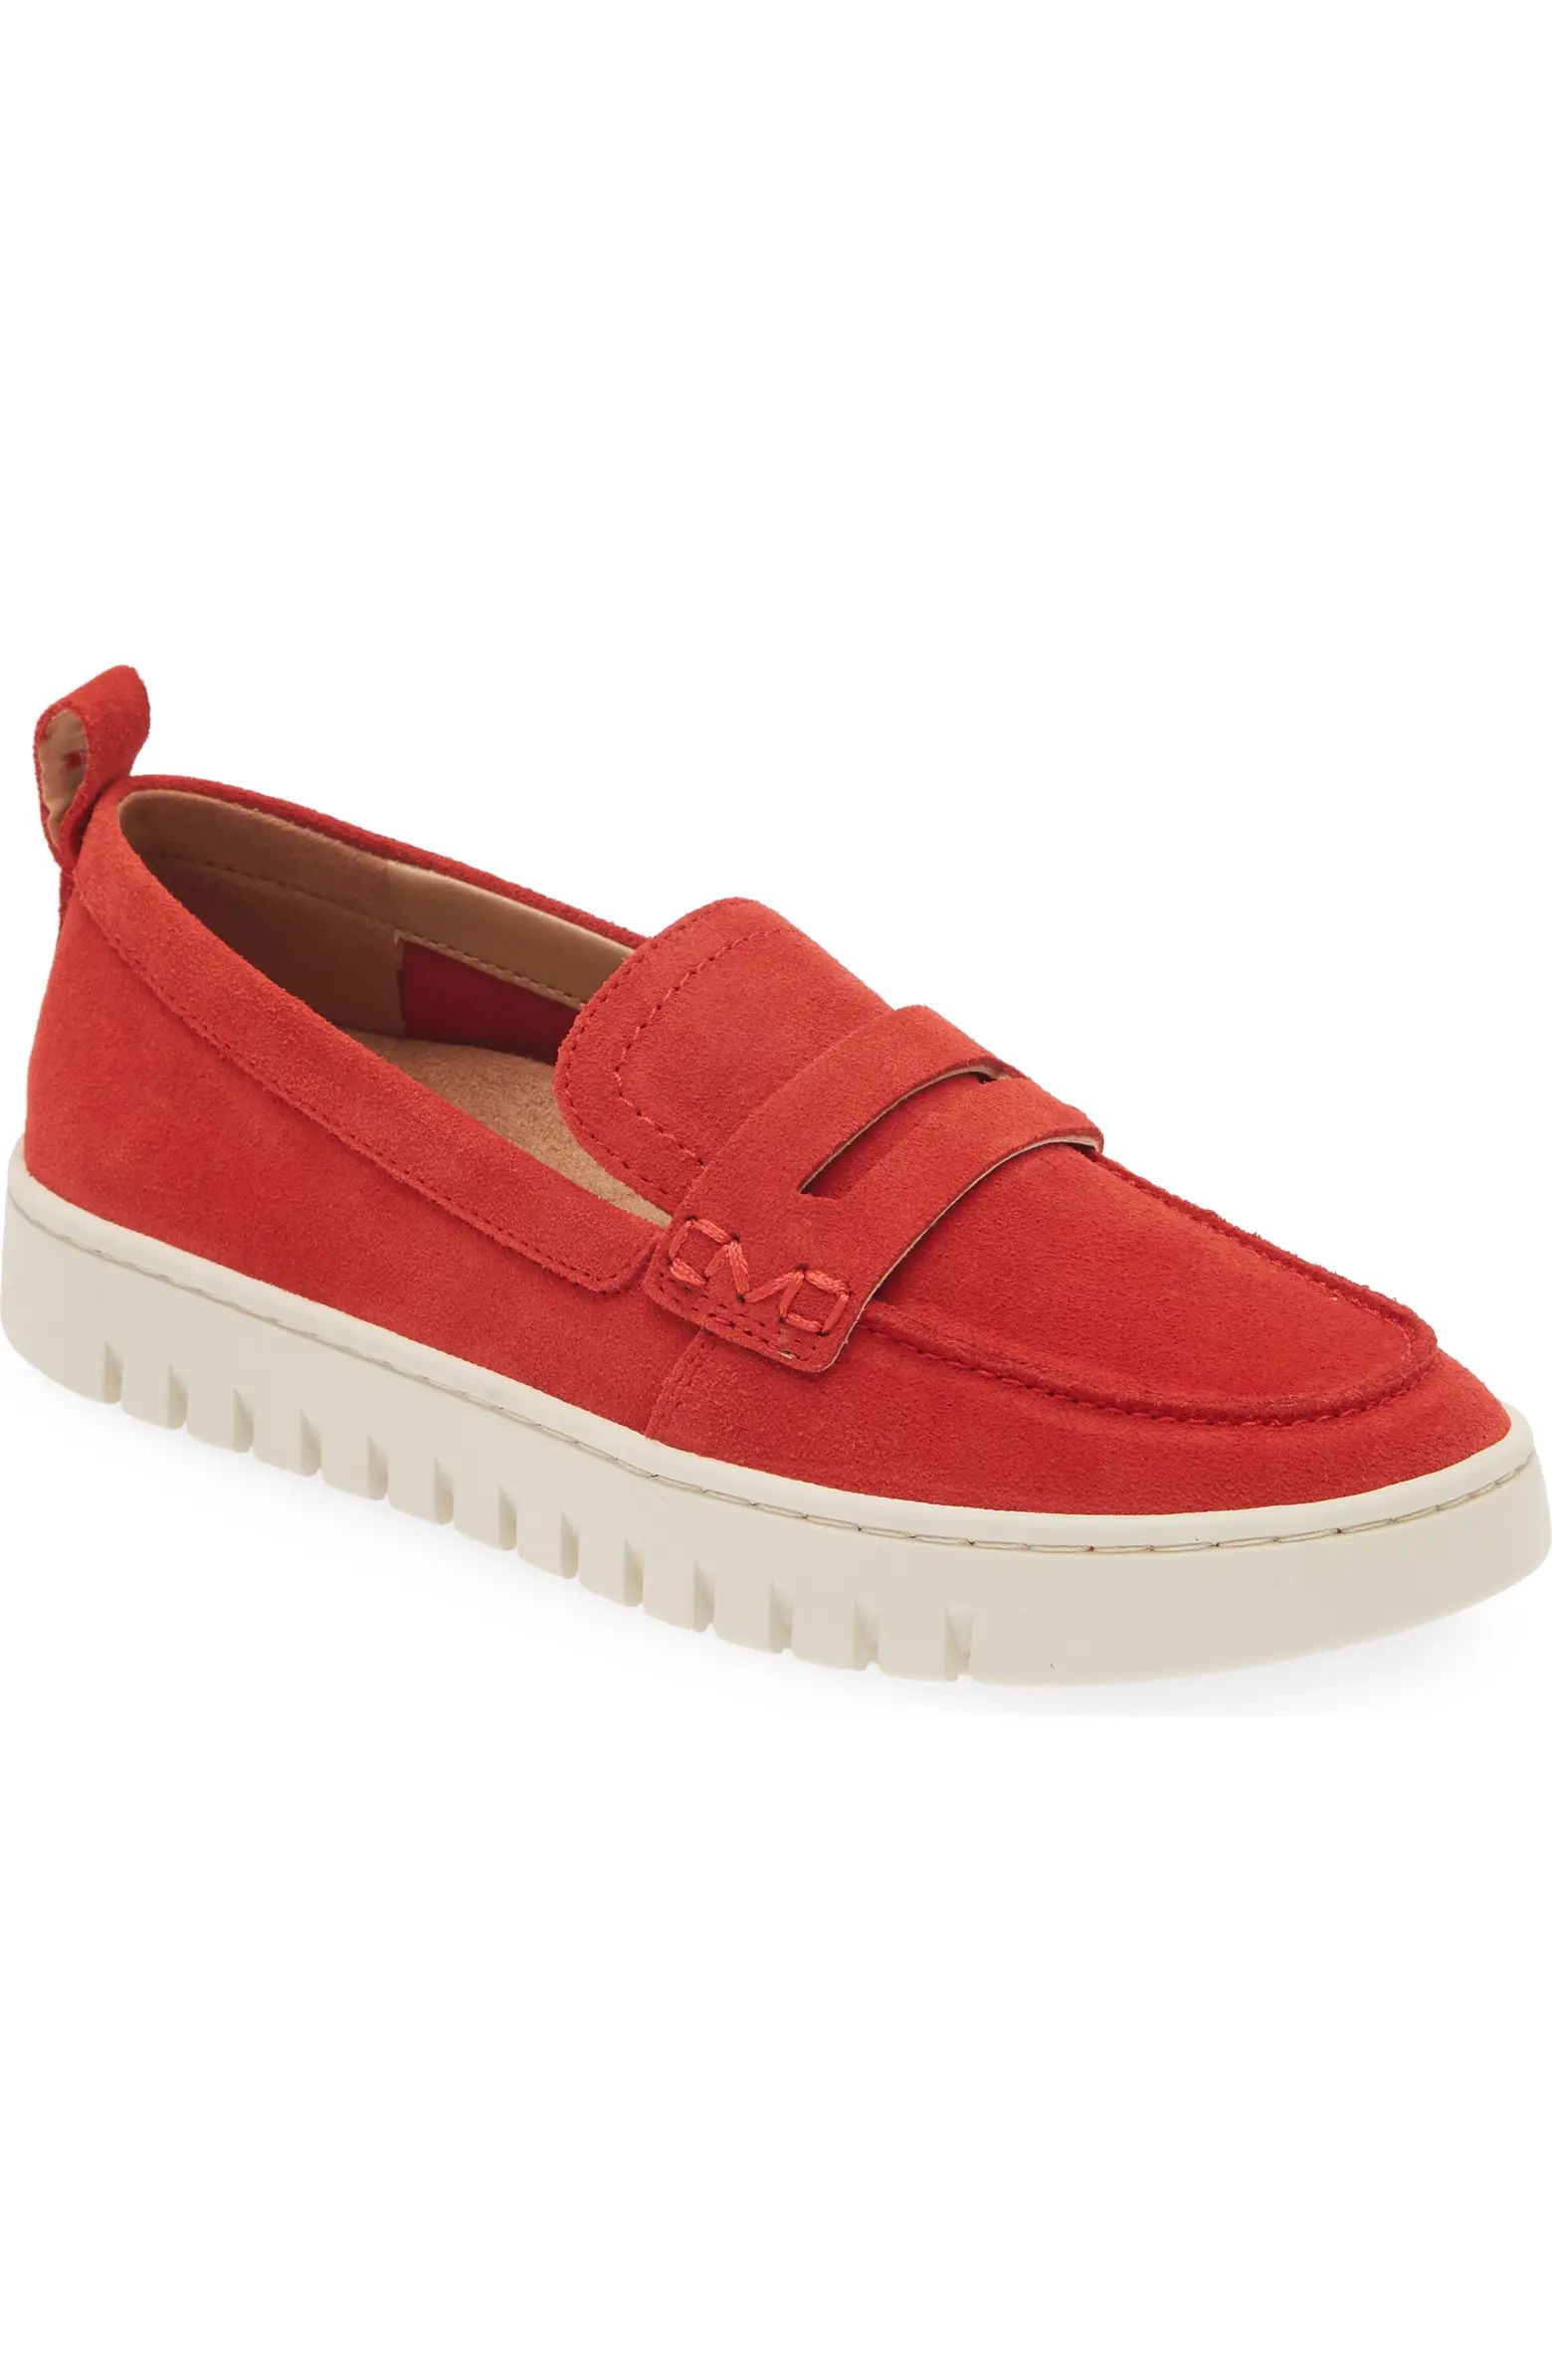 Uptown Hybrid Penny Loafer (Women) - Wide Width Available | Nordstrom